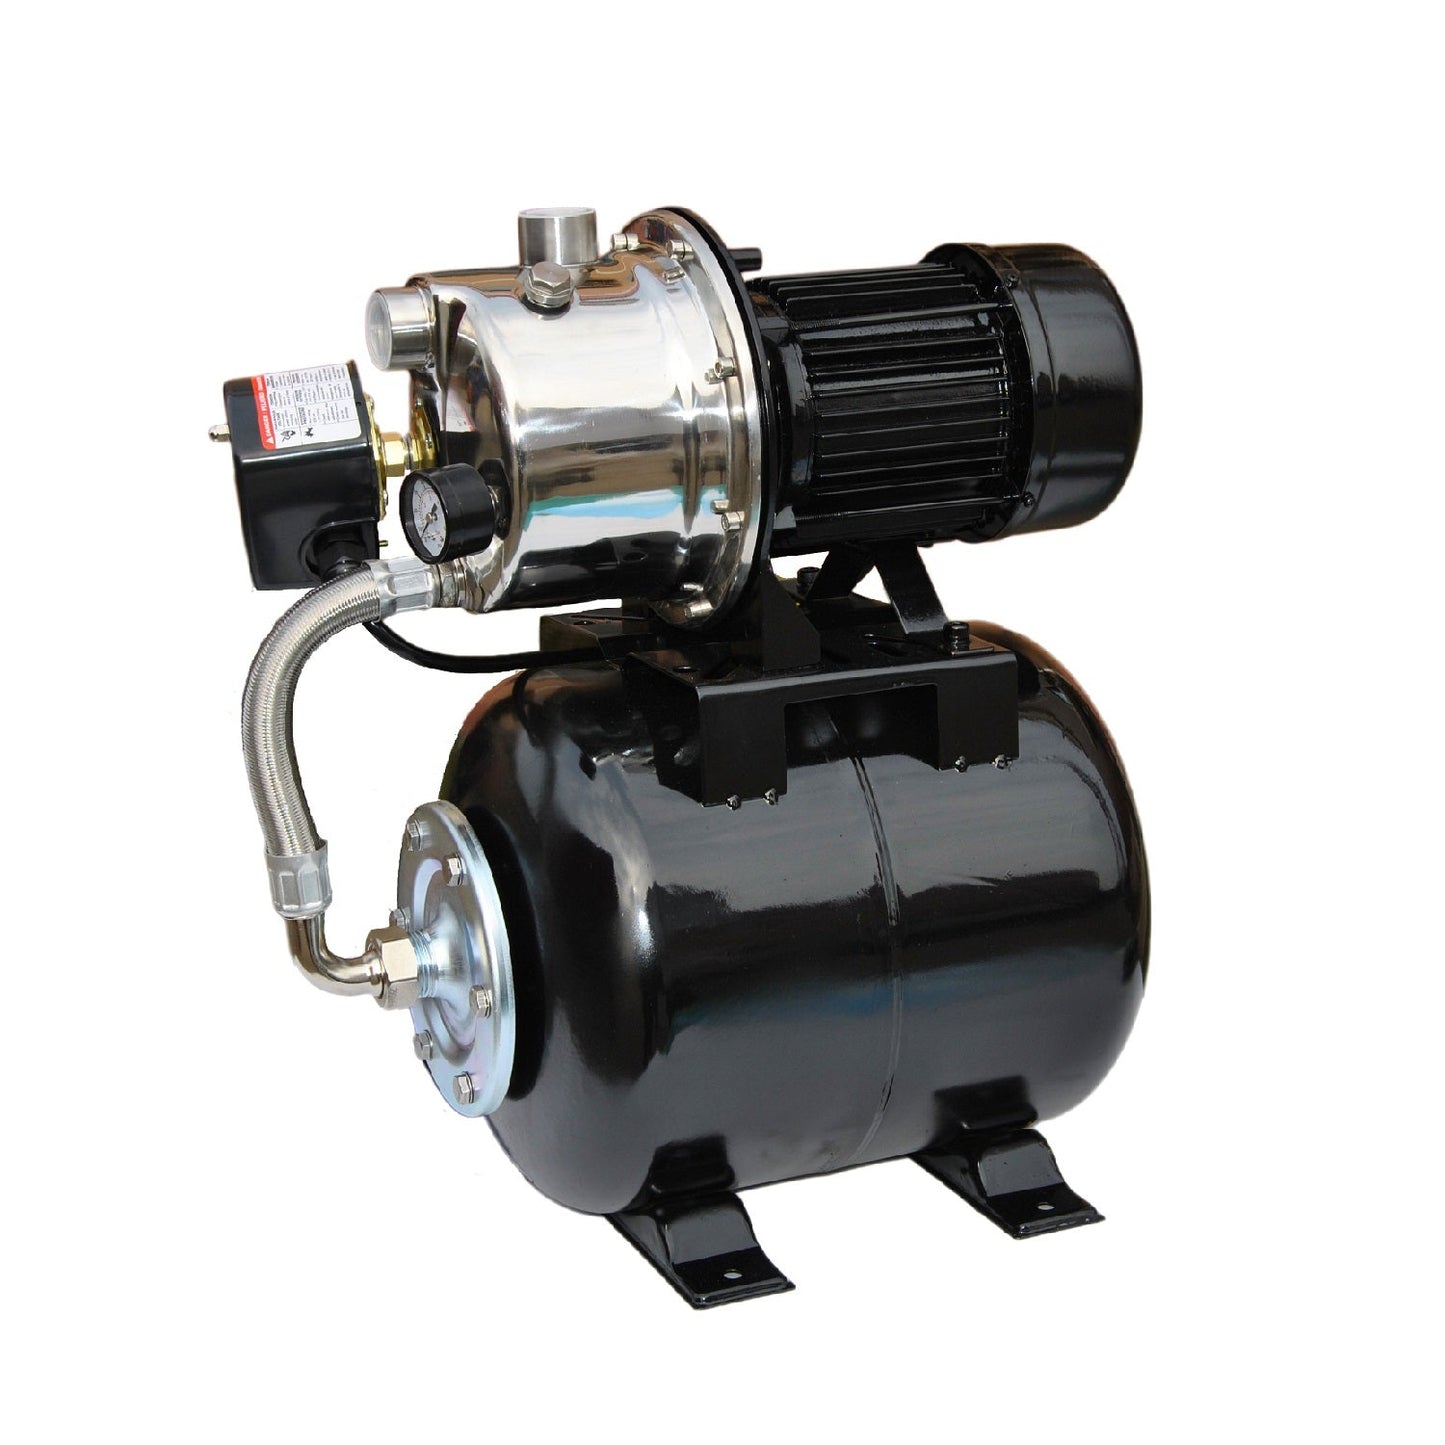 1/2 HP Stainless Steel Well Pump